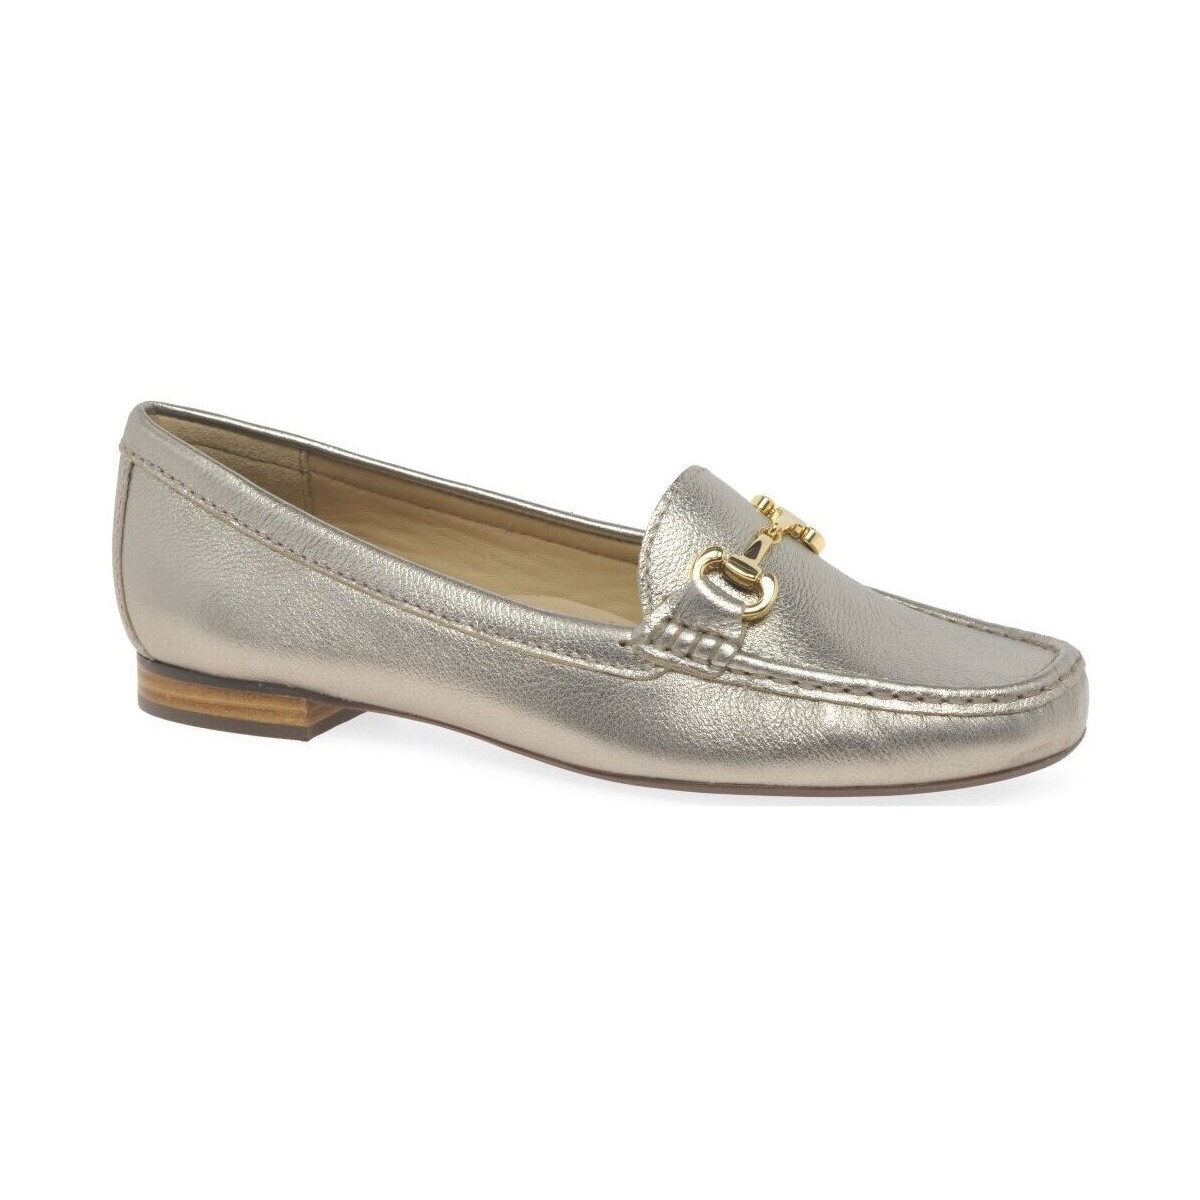 Shoes Women Derby Shoes & Brogues Charles Clinkard Sunny Womens Moccasins Gold